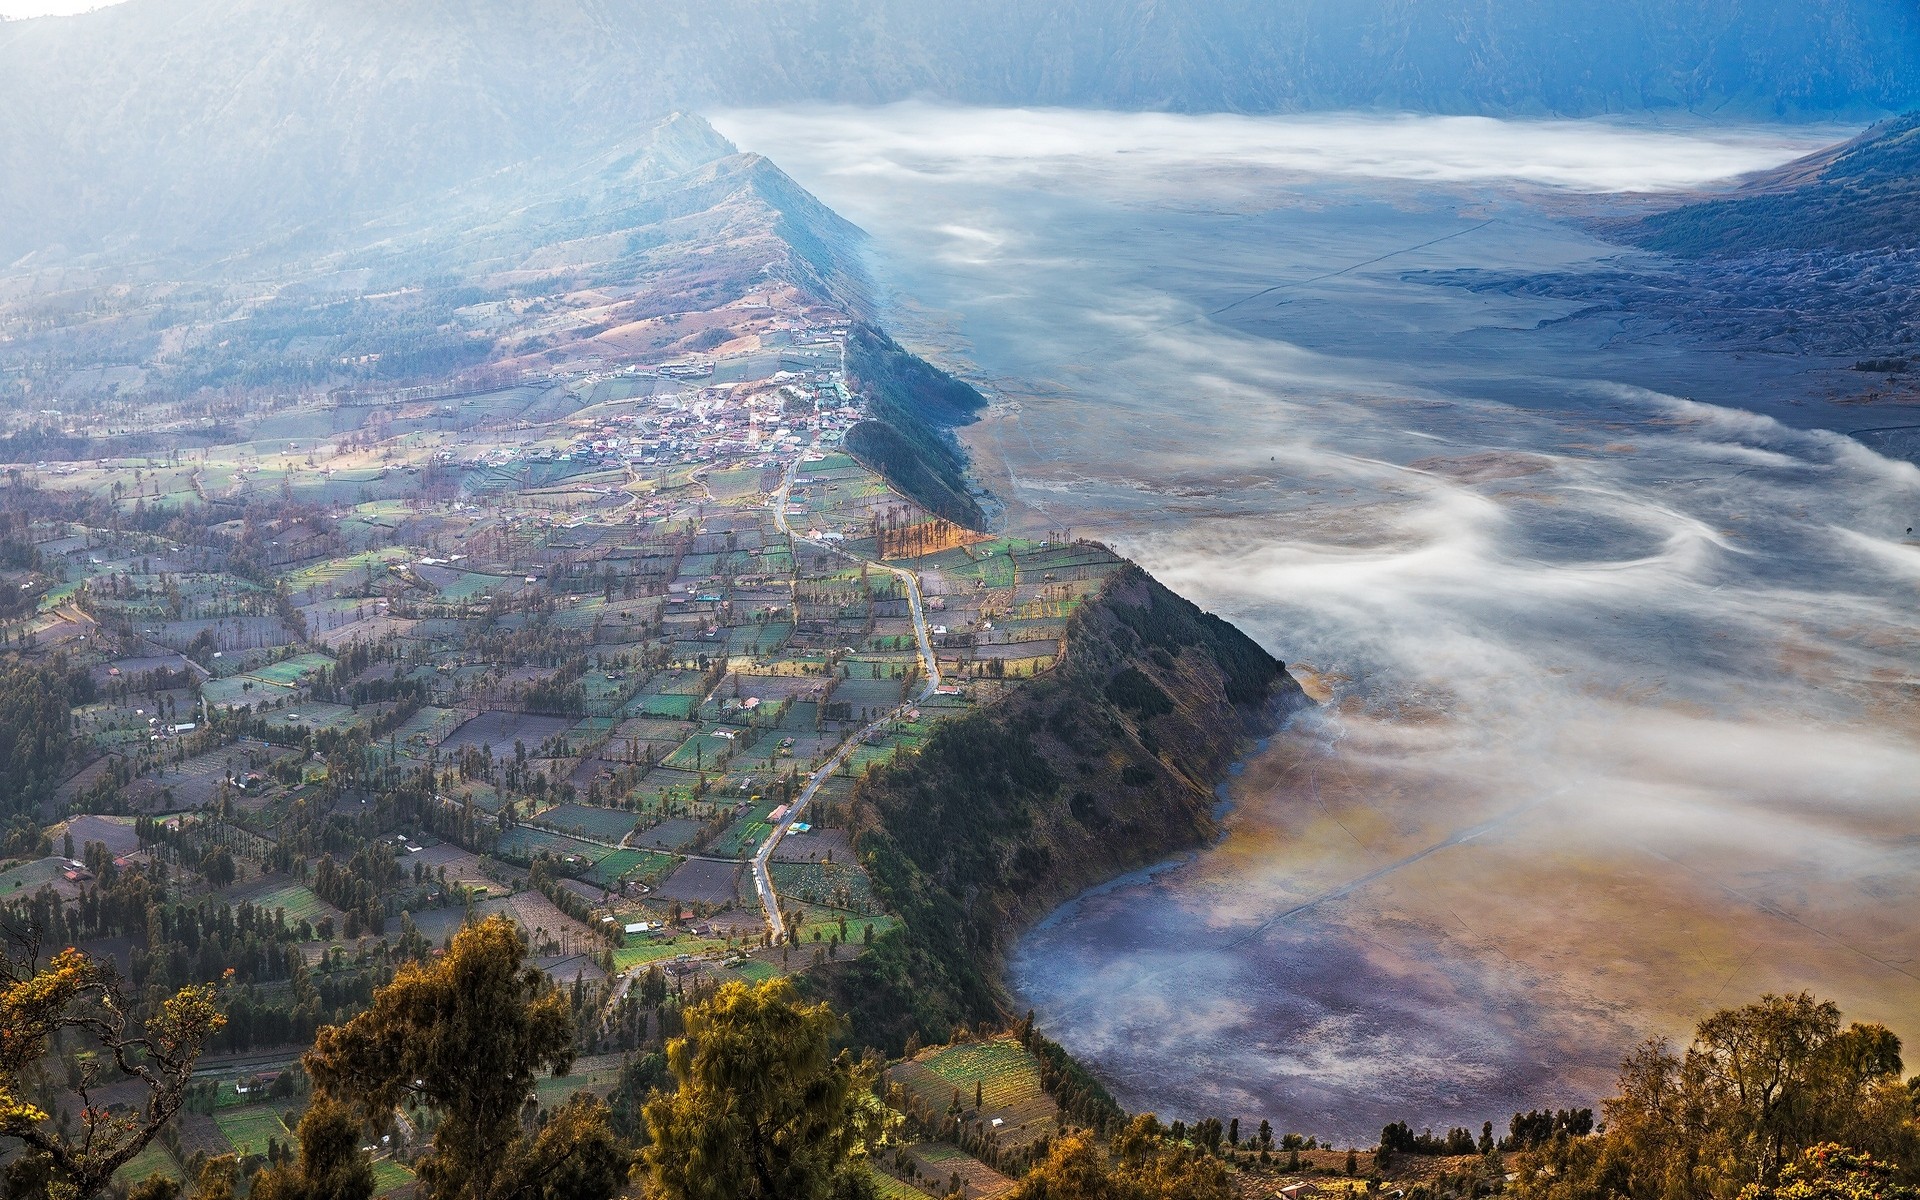 General 1920x1200 nature landscape mountains village field valley mist road trees aerial view Cemoro Lawang Indonesia Java (island)